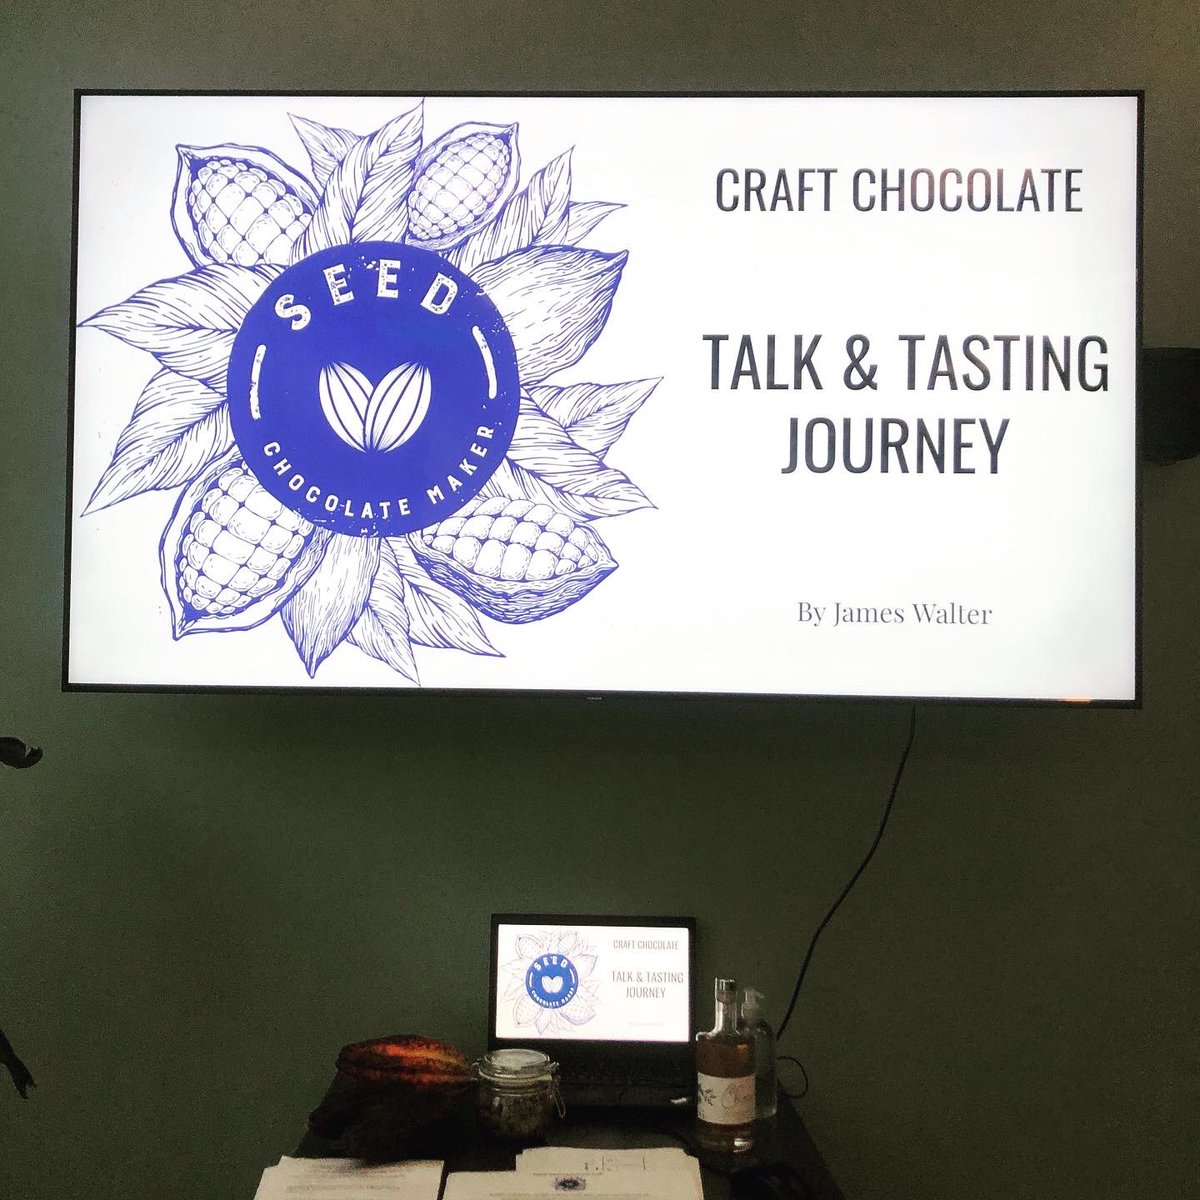 Last week we were super excited to share our chocolate knowledge with a corporate client in London. 🍫🥃💚 Thoroughly enjoyable with amazing energy in the room. The dark chocolates paired perfectly with the @chocaogin liqueur.